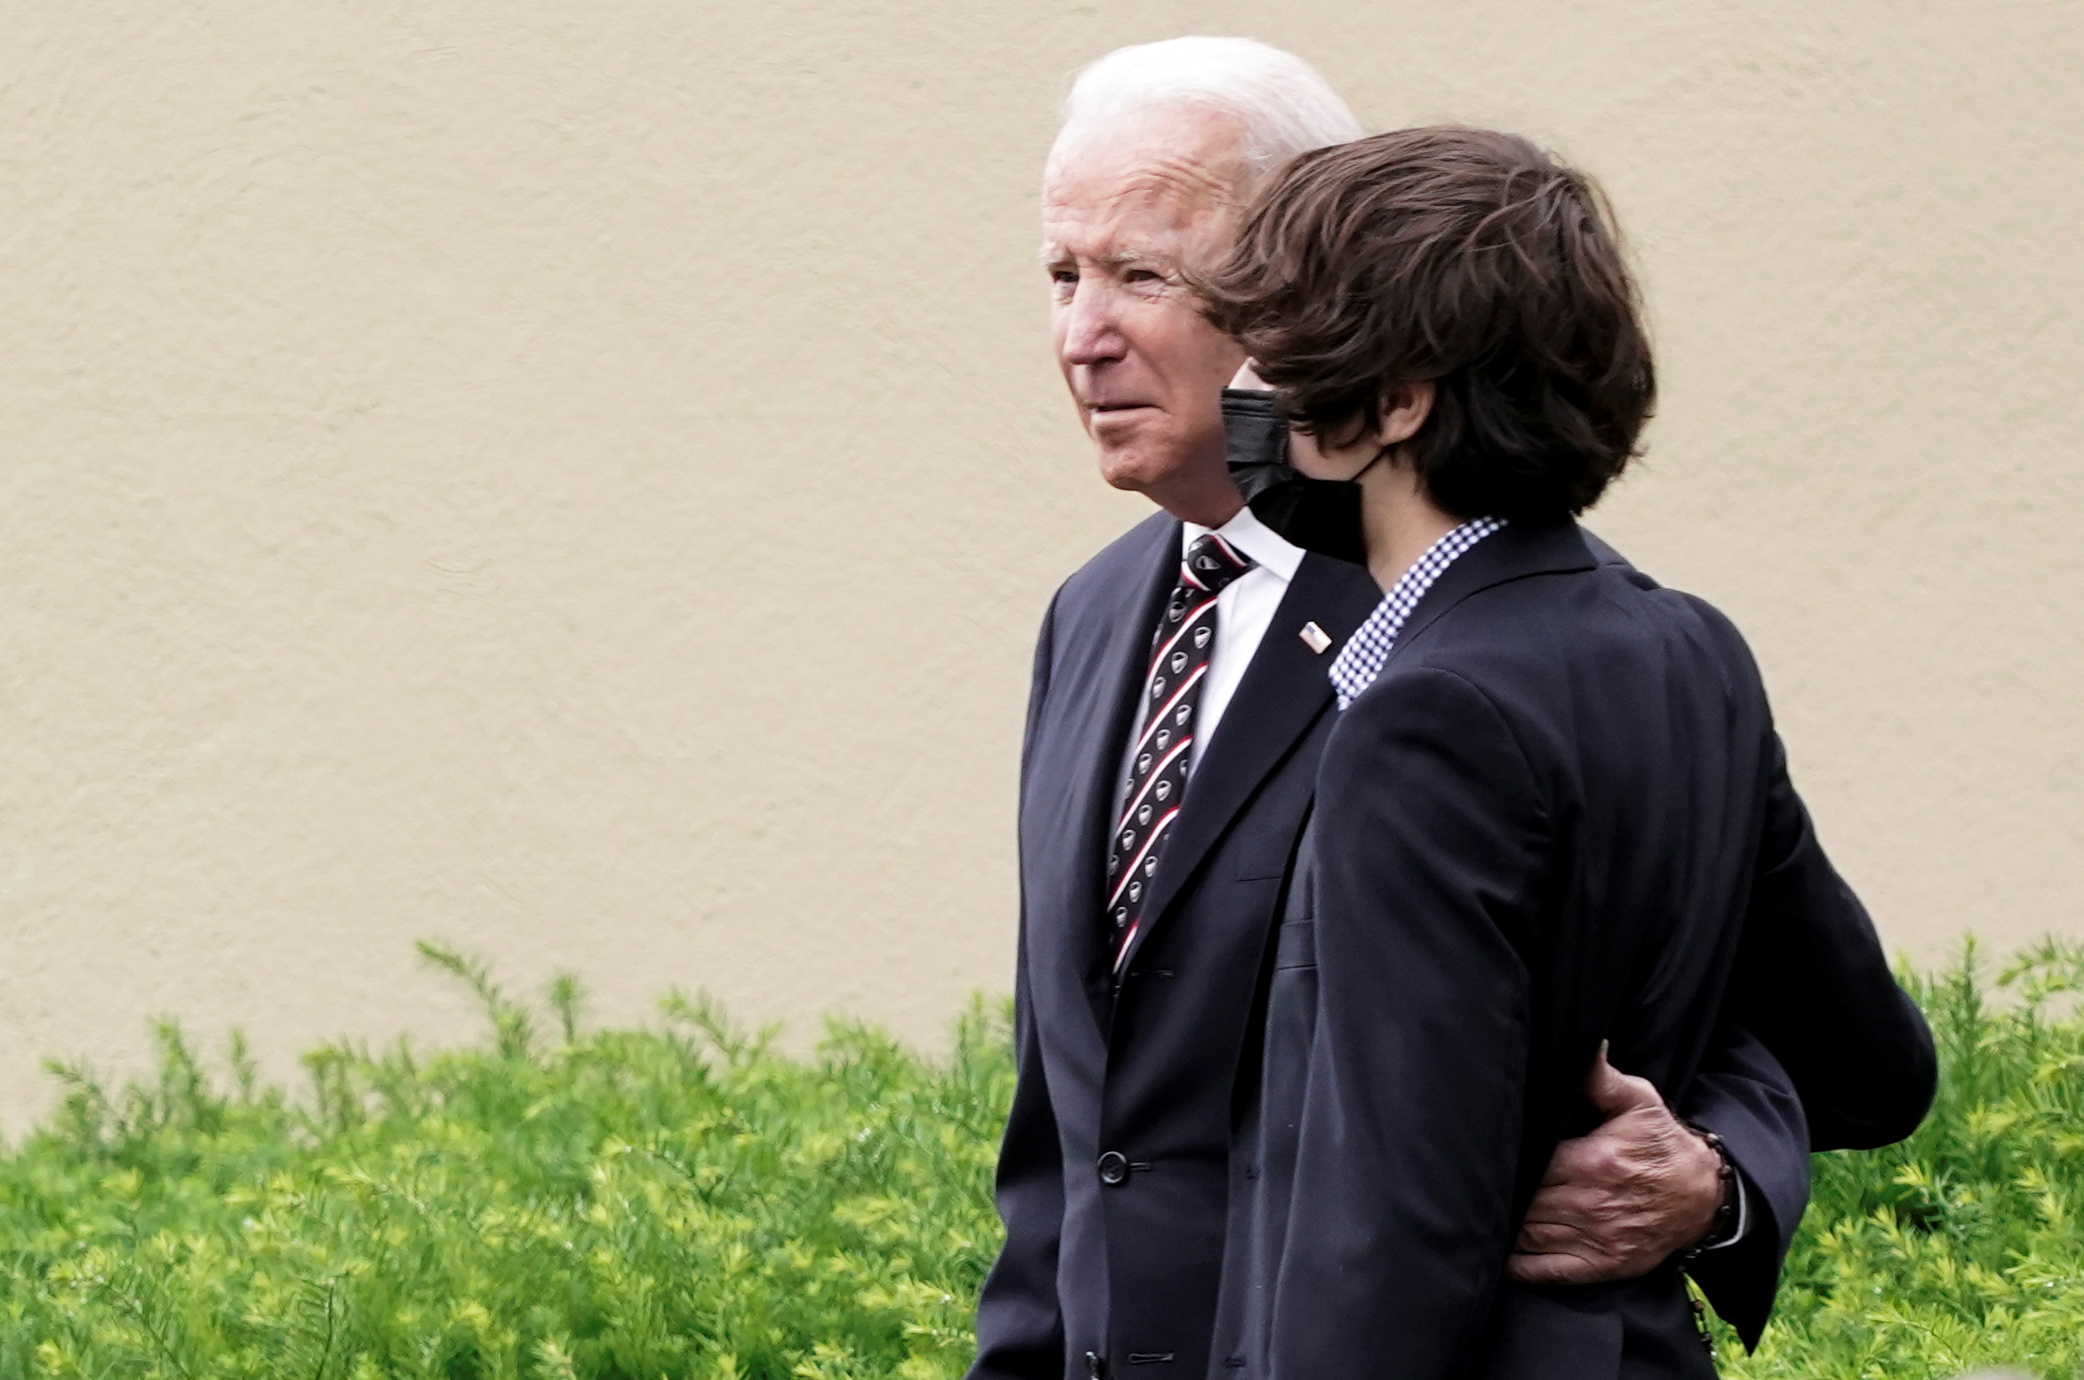 Biden marks son Beau's death with grave visit, remarks to military families  | Reuters